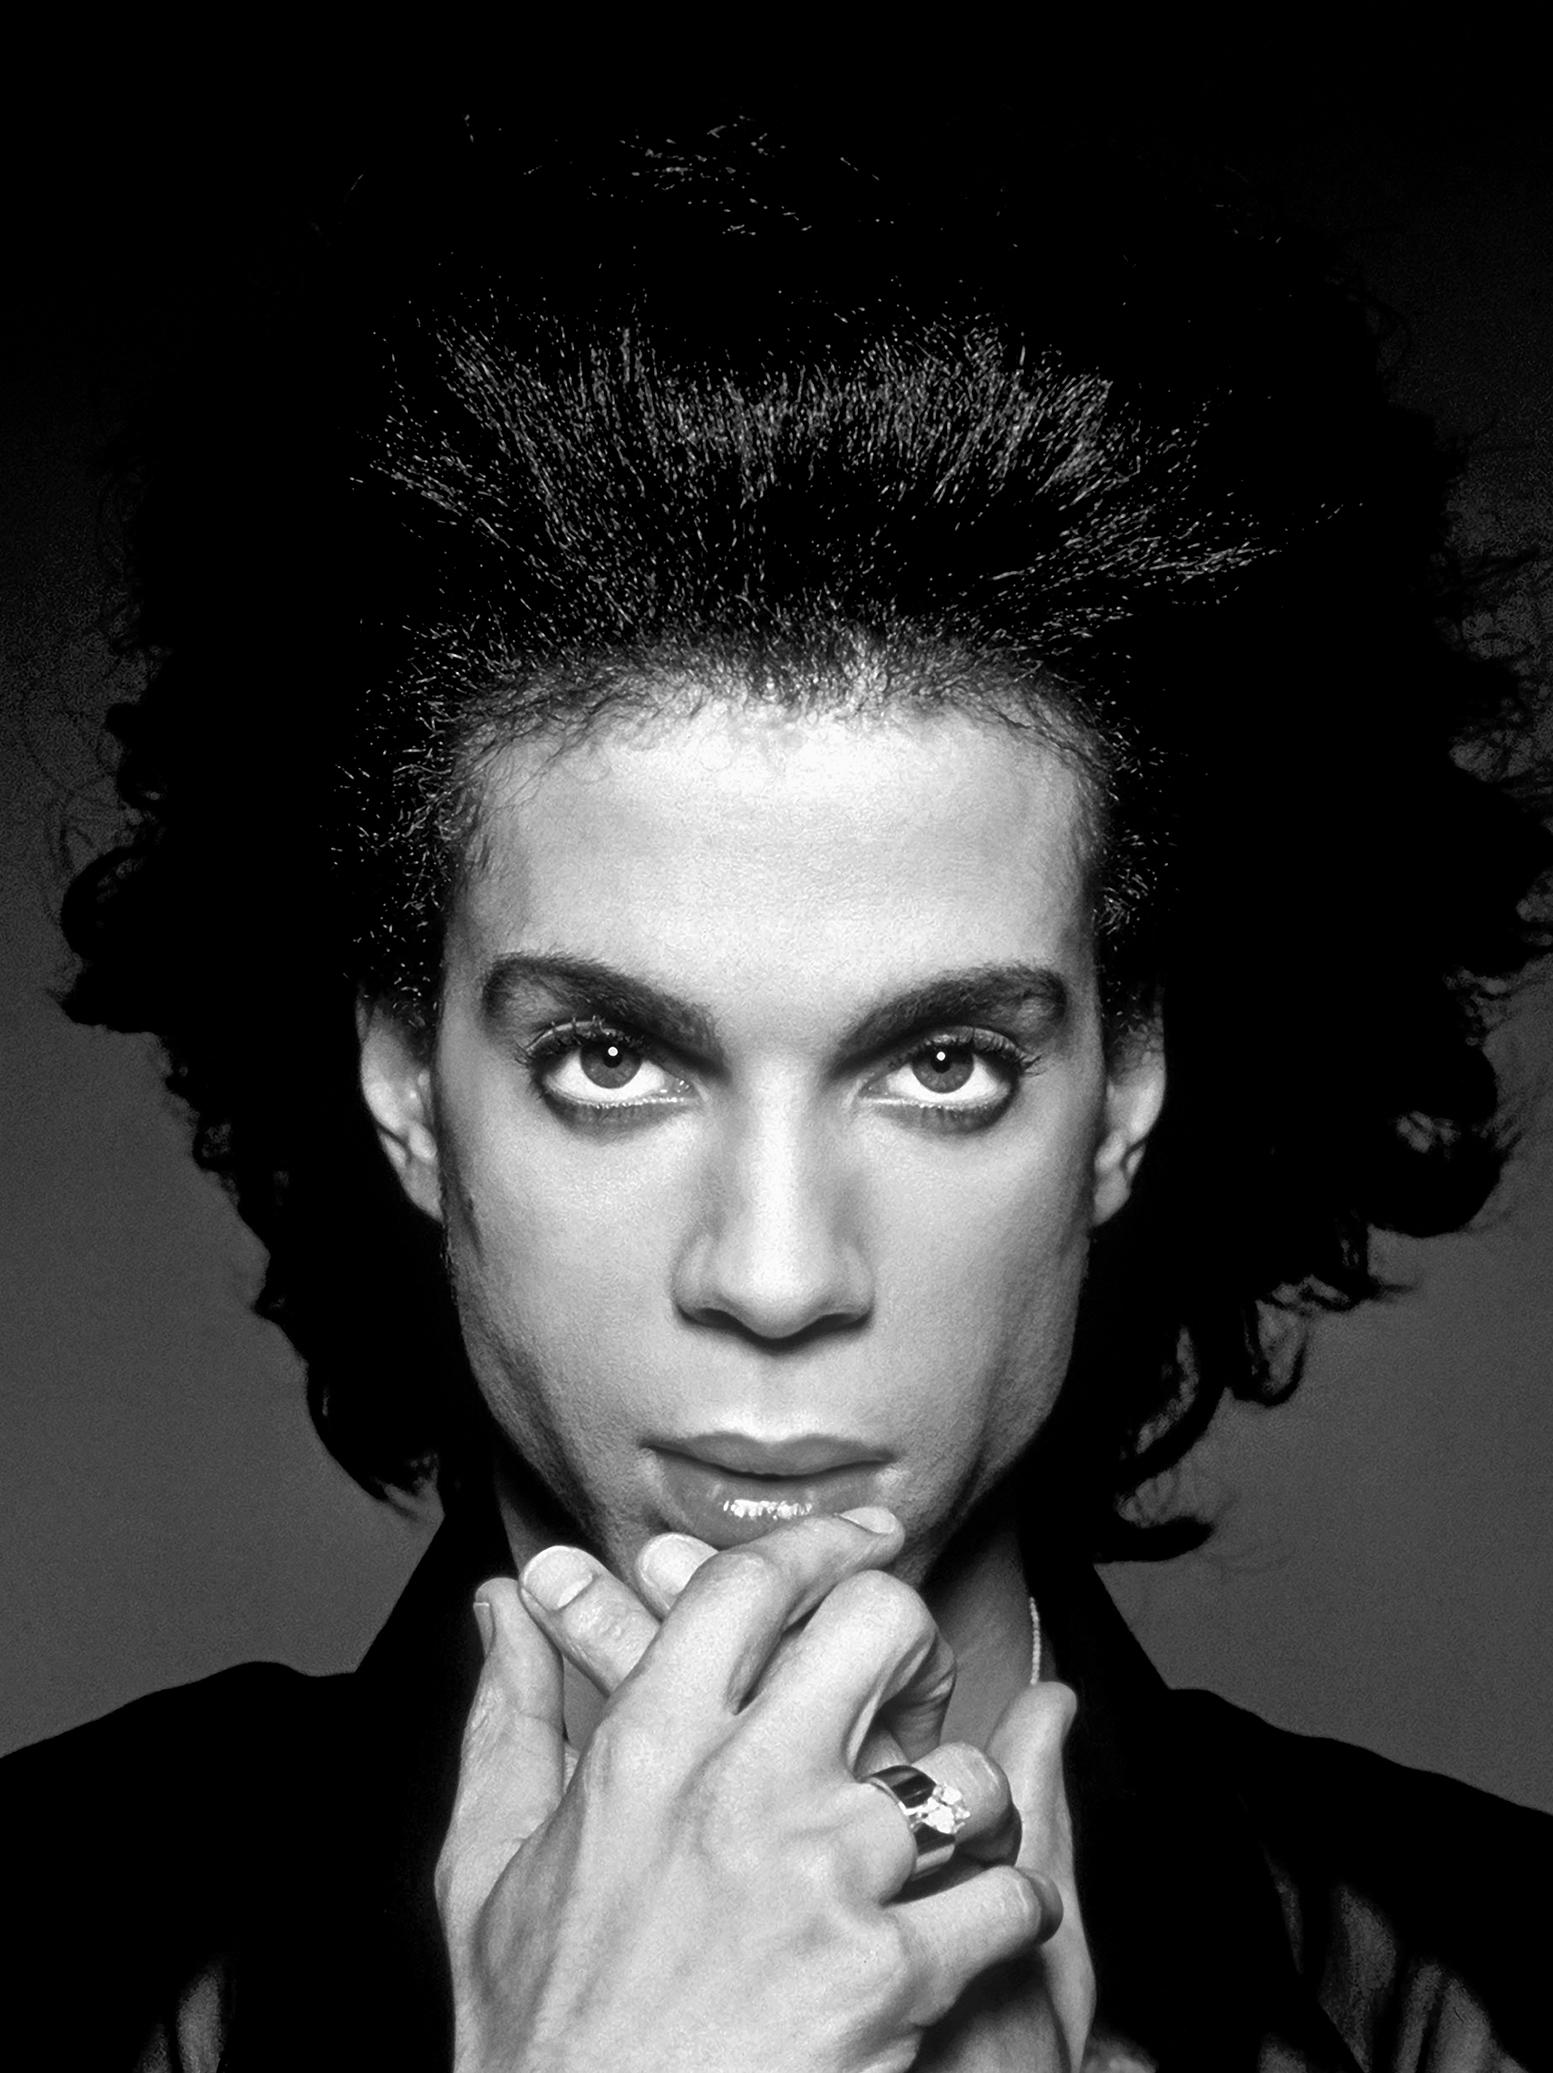 Black and White Photograph Unknown - Prince, The Artistics